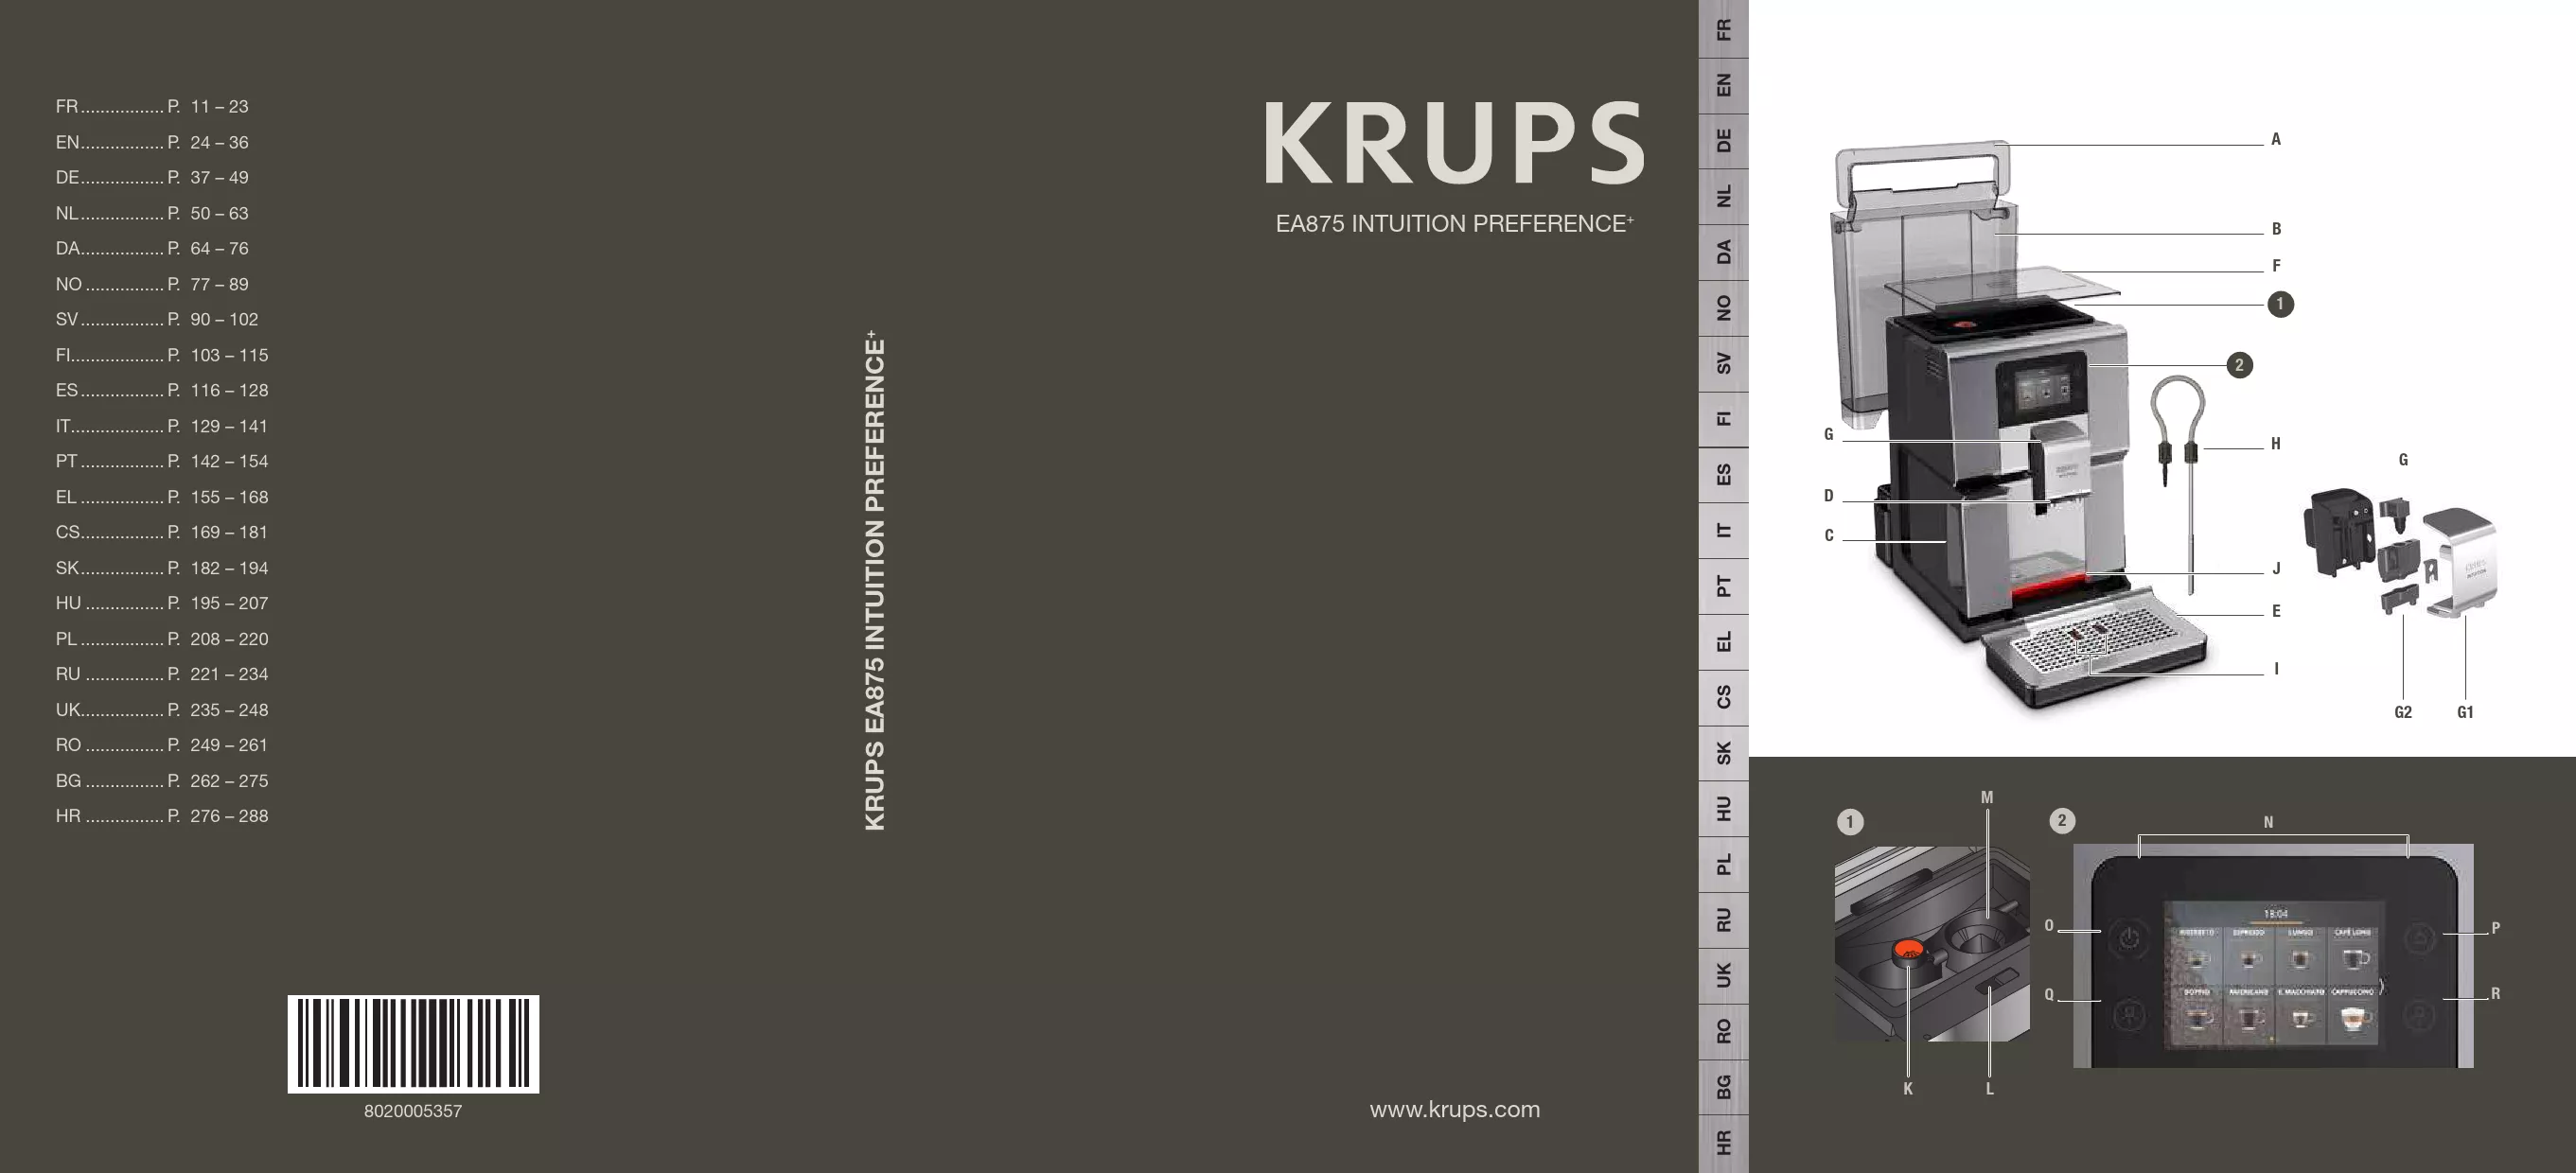 Mode d'emploi KRUPS INTUITION PREFERENCE EA872